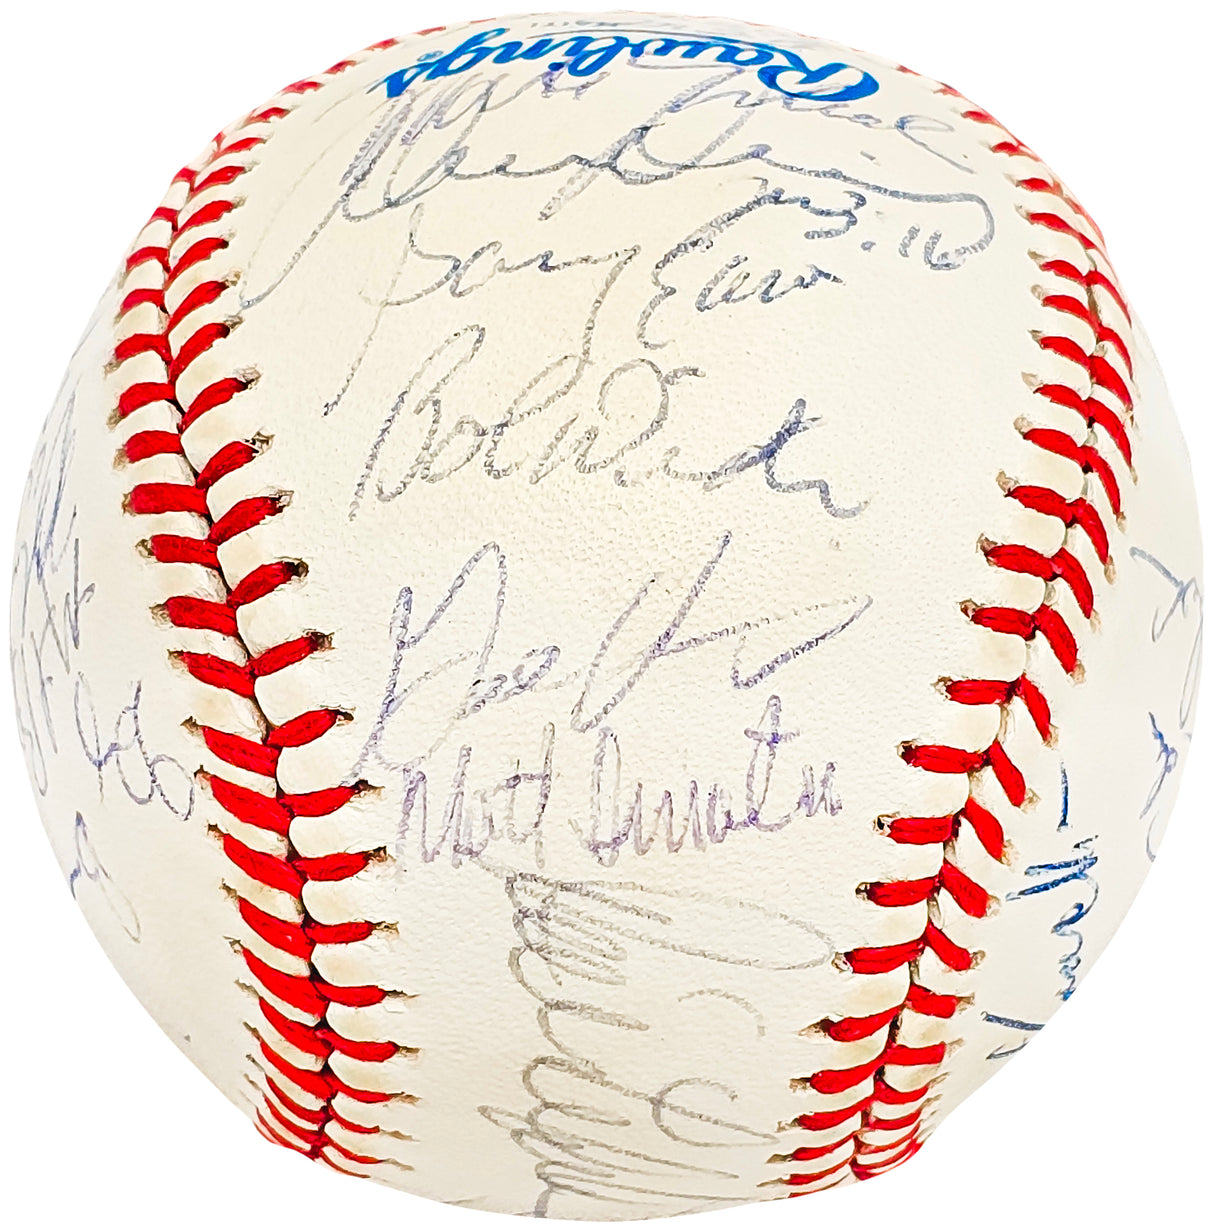 1990 Seattle Mariners Team Signed Autographed Official AL Baseball With 29 Signatures Including Ken Griffey Jr. & Edgar Martinez SKU #218488